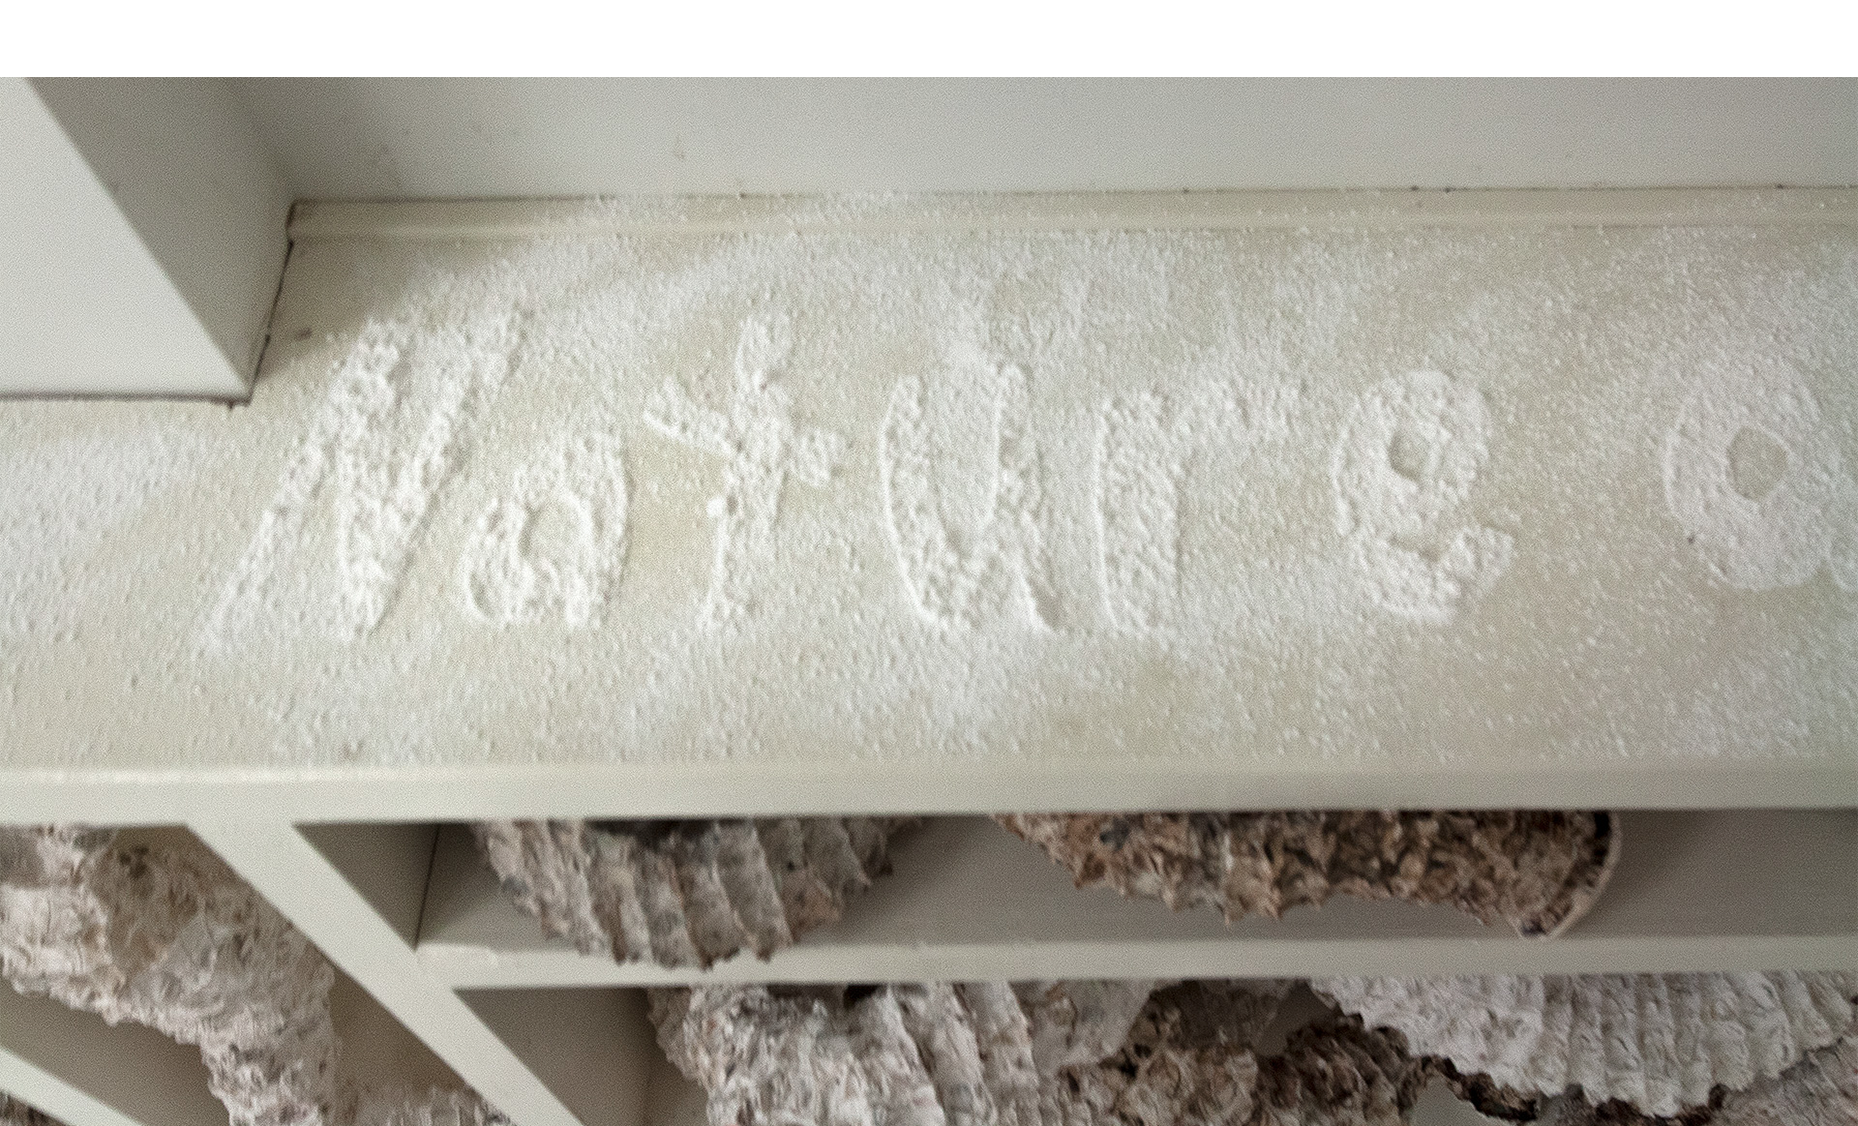  Installation detail of bookcase surface, text from Wes Jackson stenciled in powdered plaster “Consult the genius of the place . . . nature as measure”. 